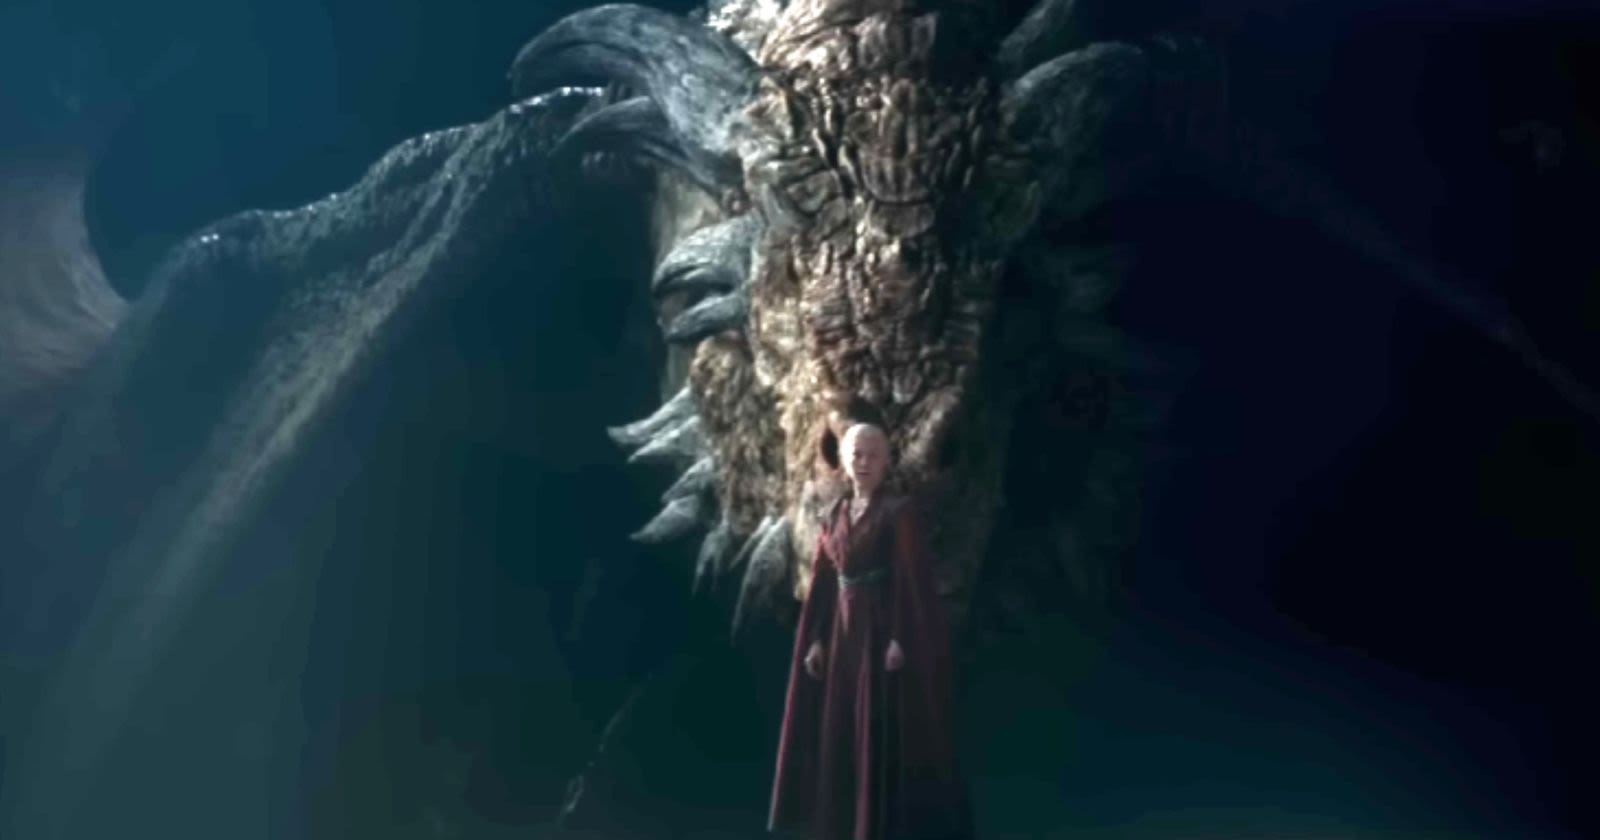 5 Things You May Have Missed in House of the Dragon Season 2 Trailer